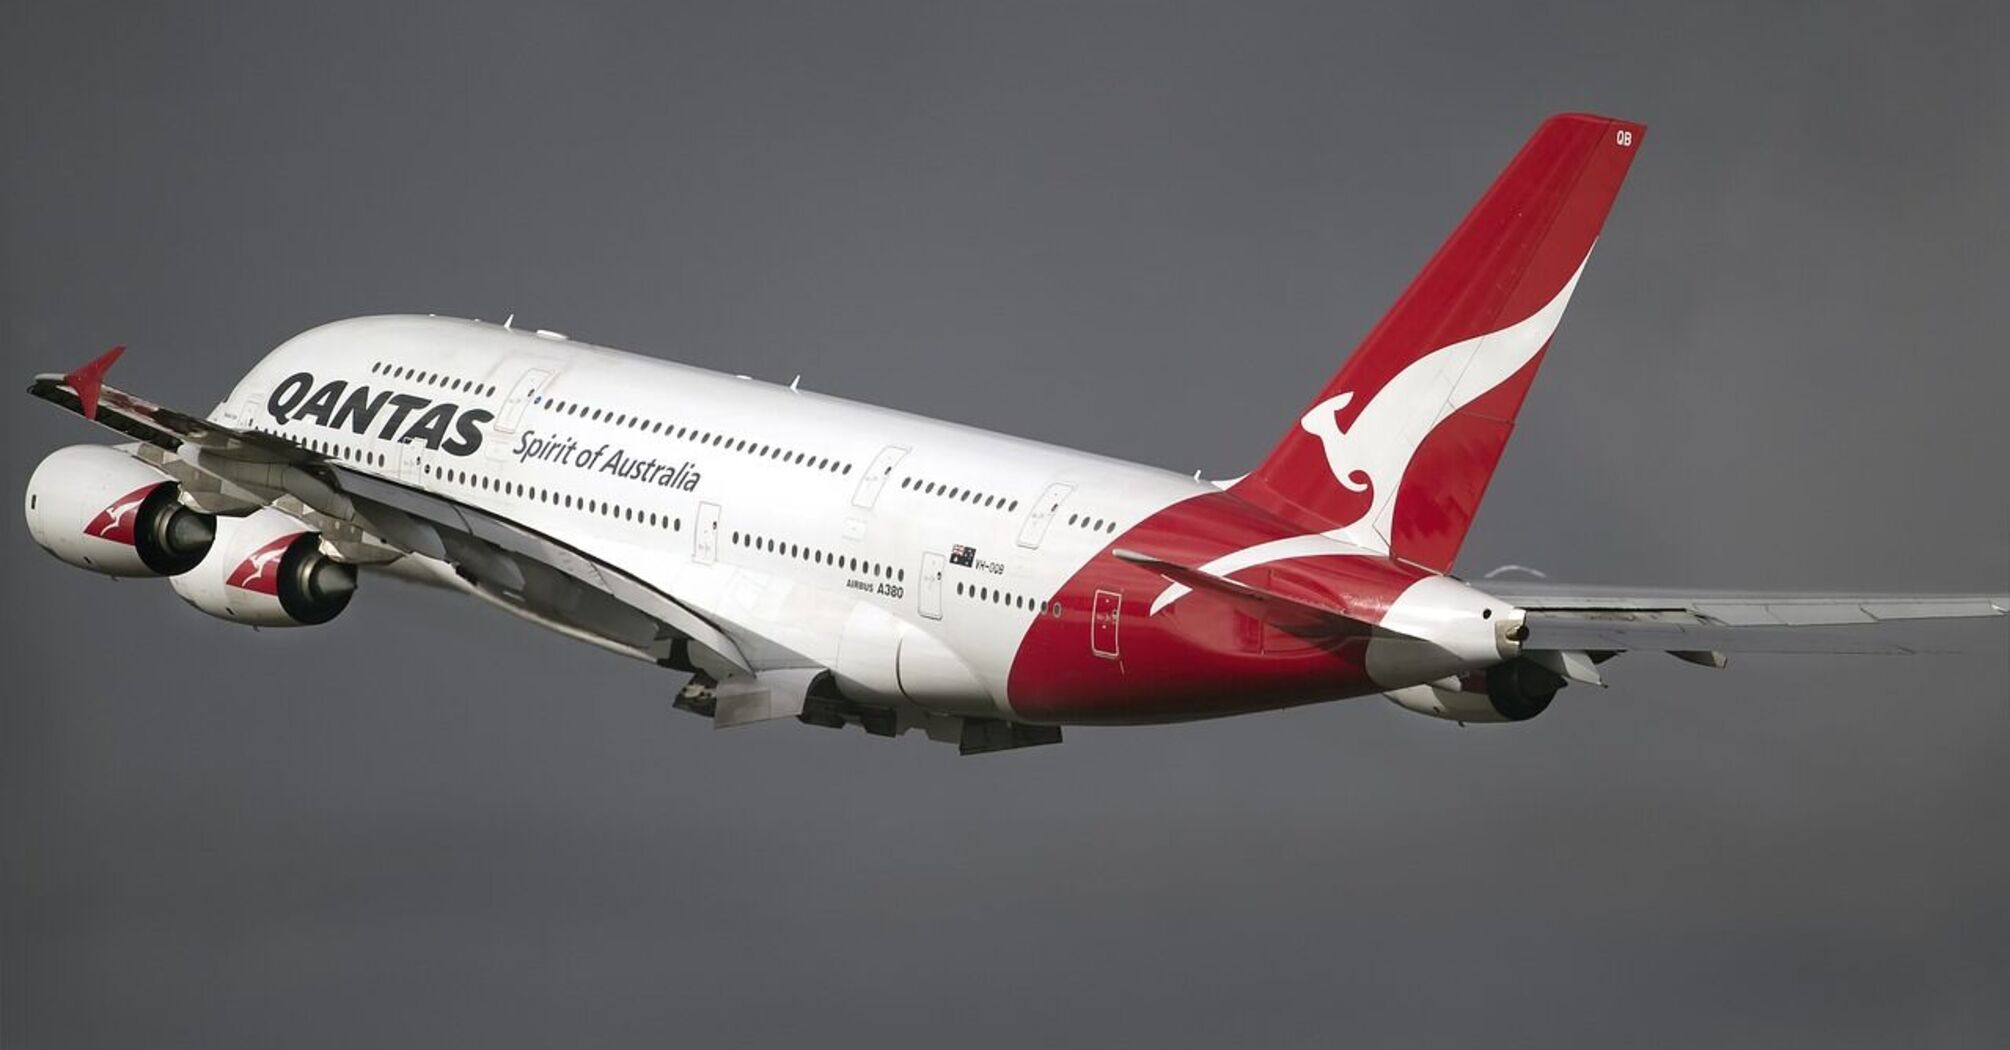 Qantas has replaced a Boeing 737 to minimize the impact of the weather on its passengers